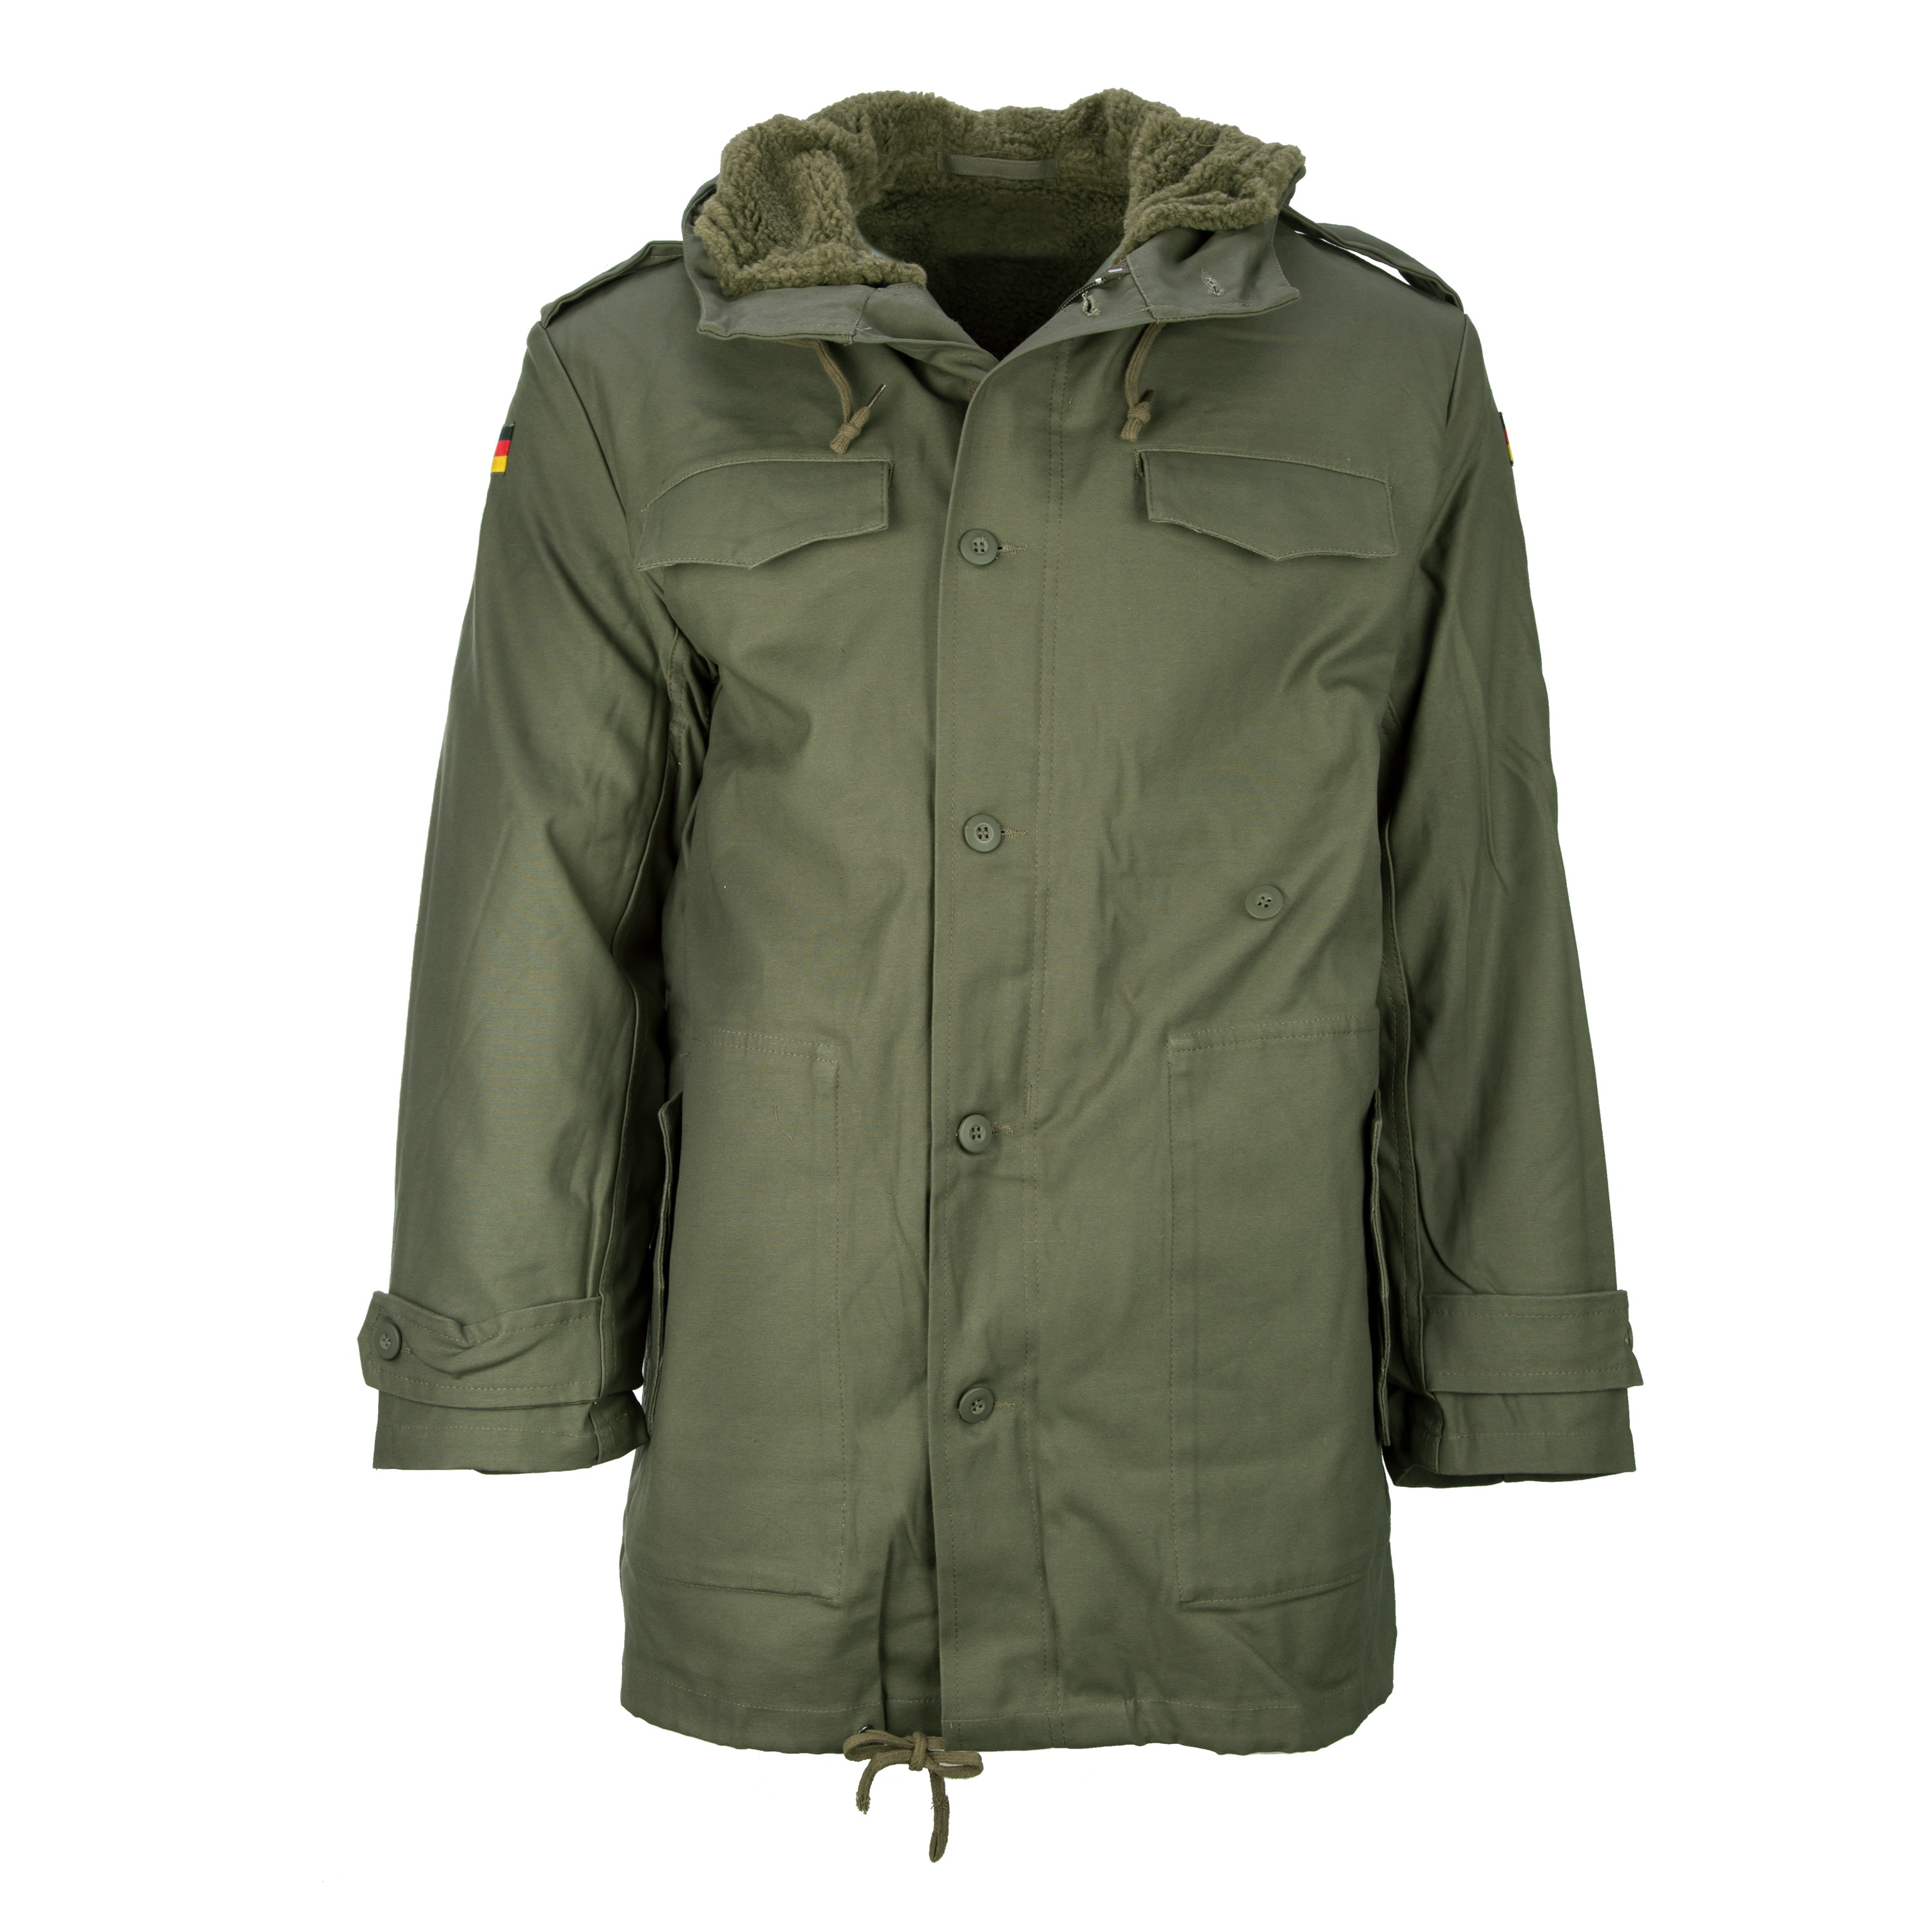 Purchase the German Army Parka olive green by ASMC